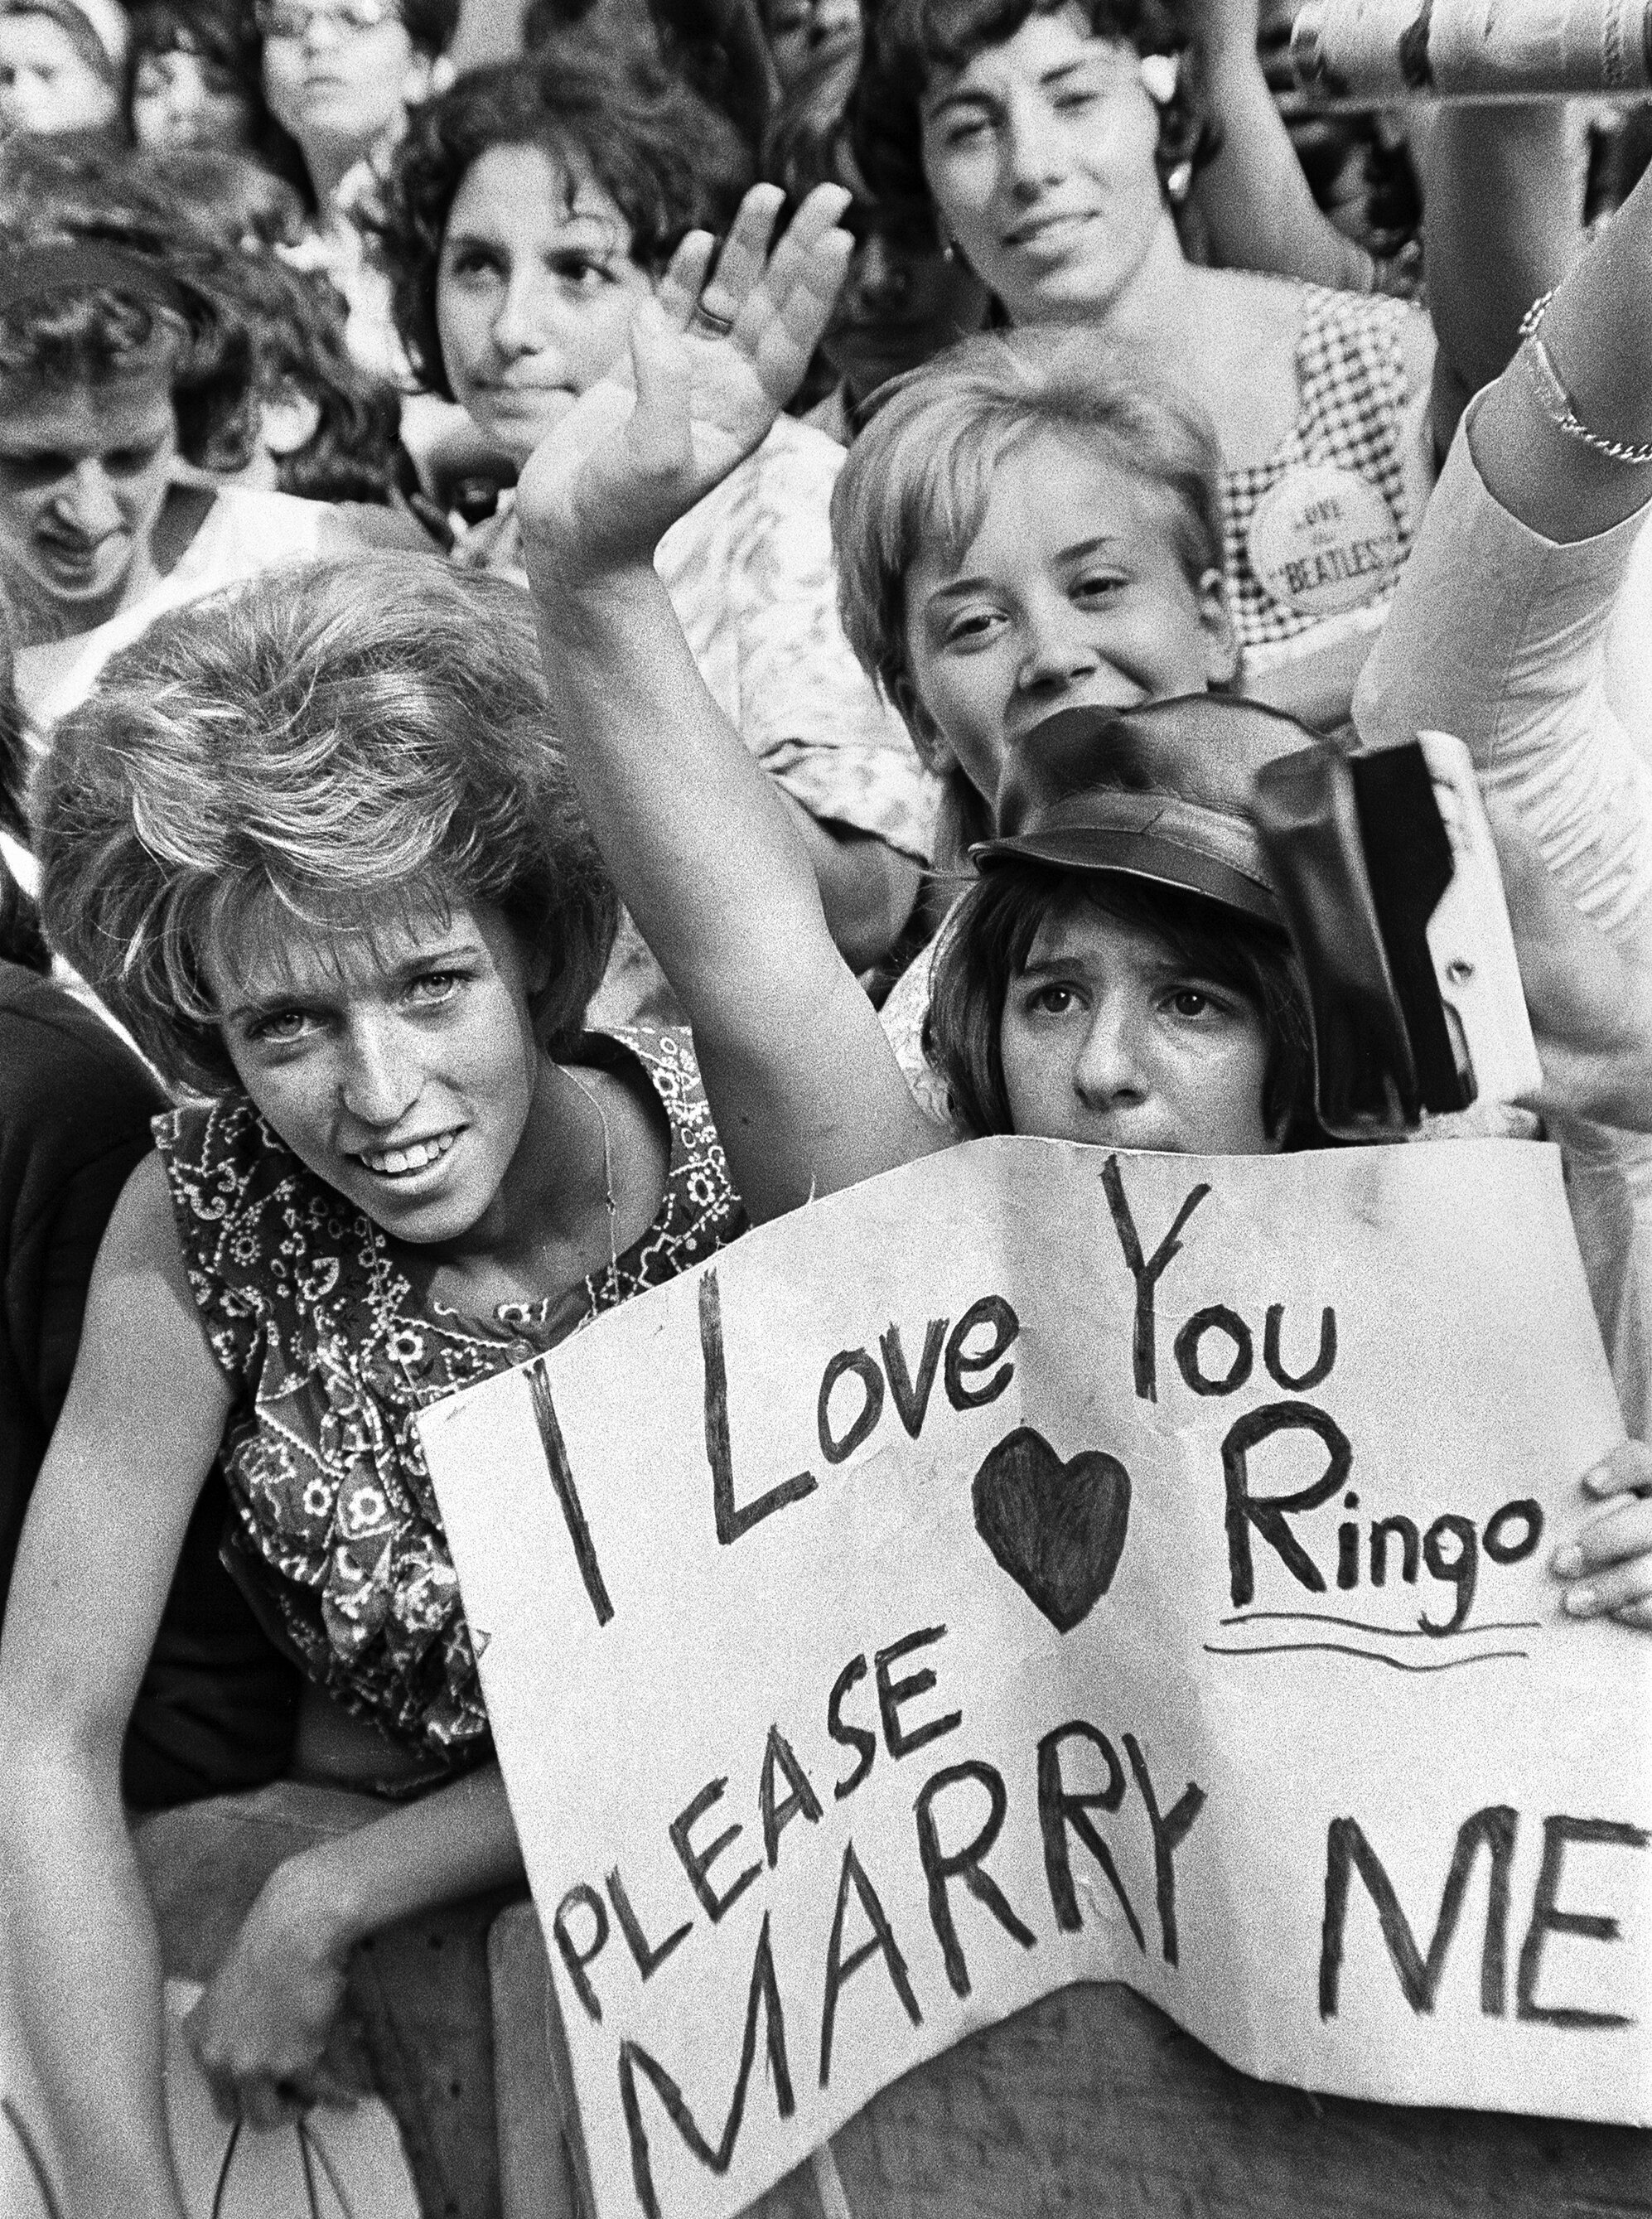 The Beatles fans in New York City. A fan holds a sign that says 'I love you Ringo. Please marry me!'